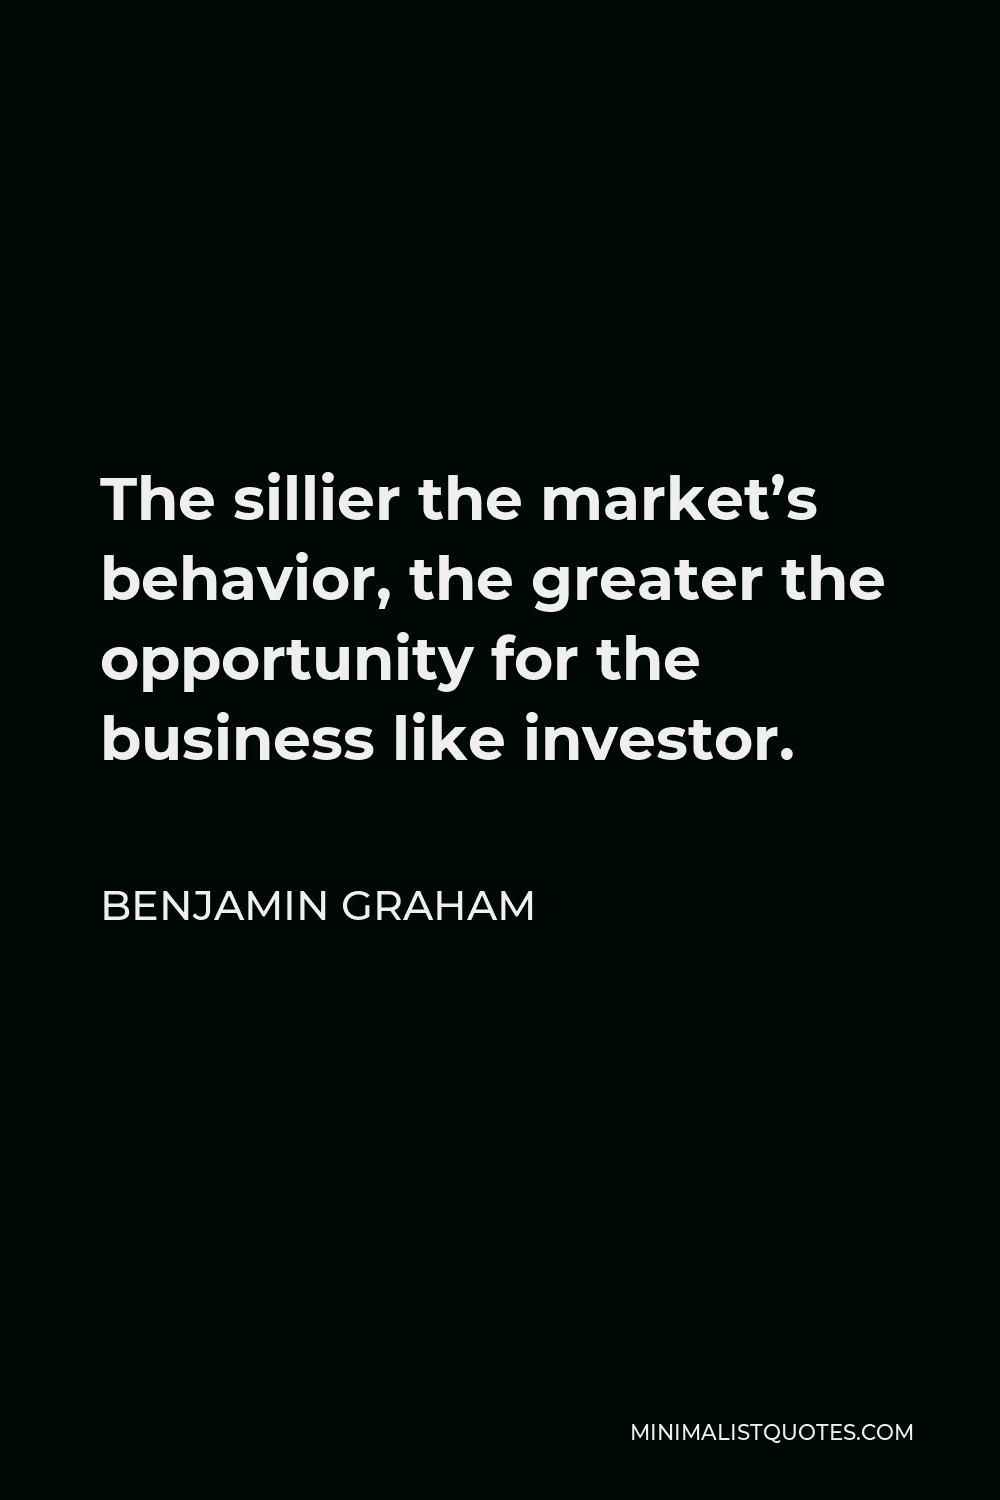 Benjamin Graham Quote - The sillier the market’s behavior, the greater the opportunity for the business like investor.